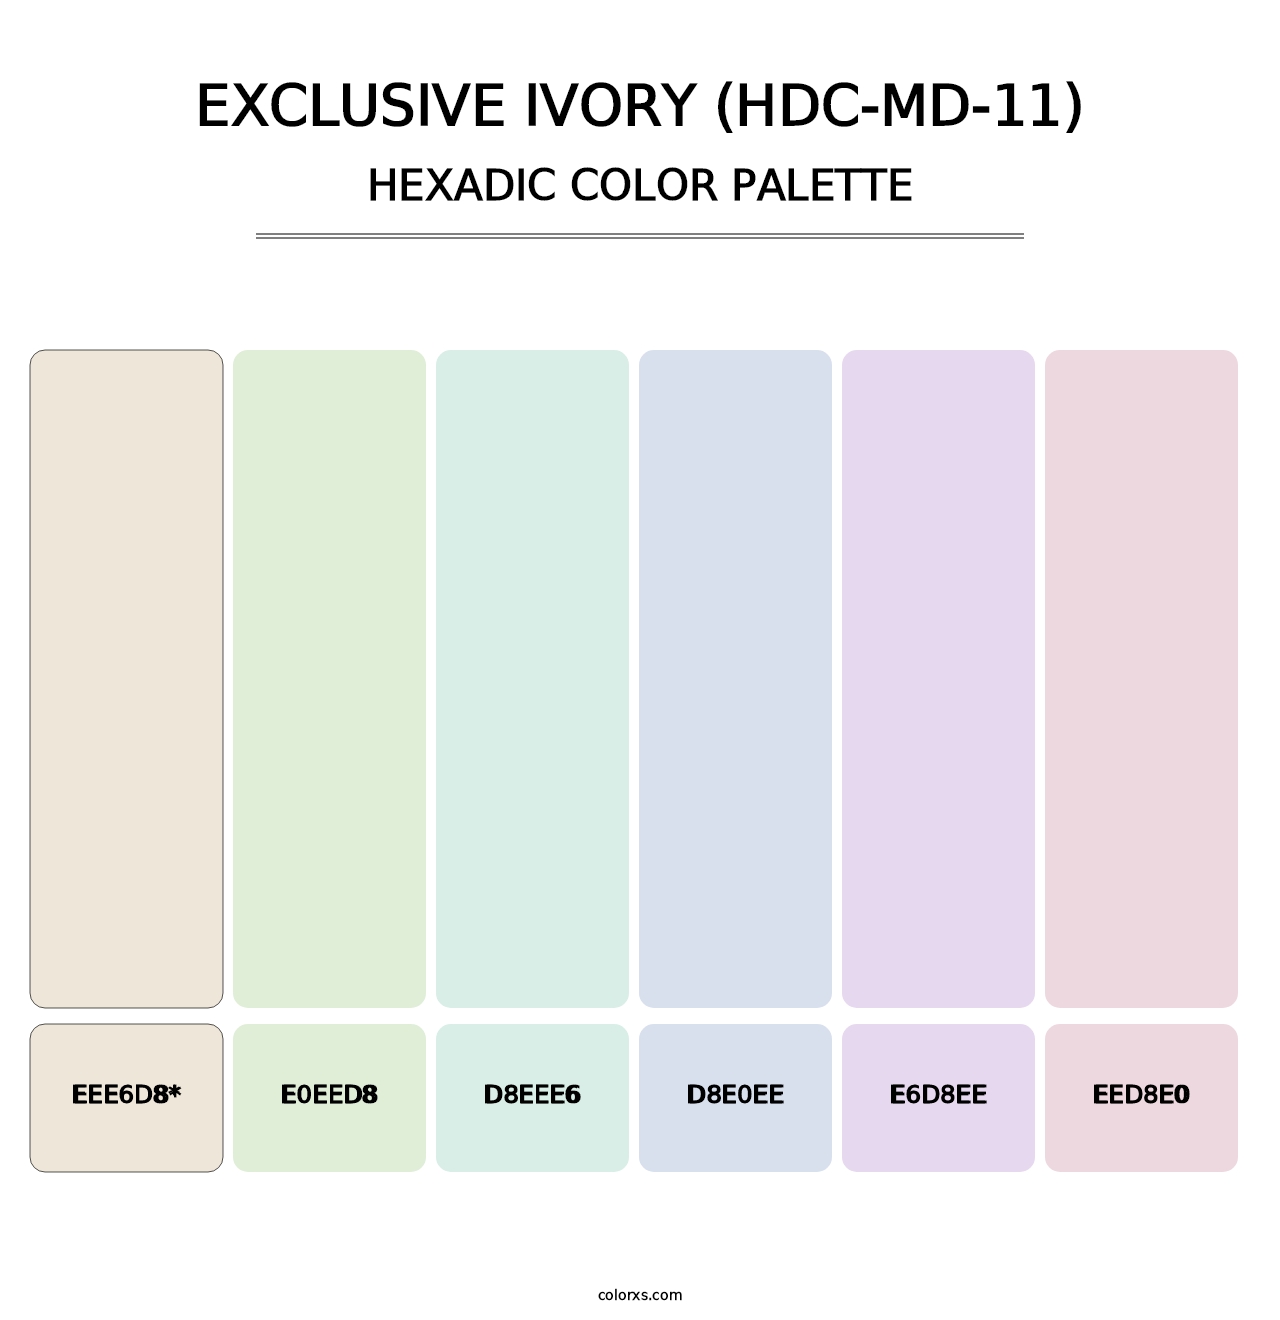 Exclusive Ivory (HDC-MD-11) - Hexadic Color Palette